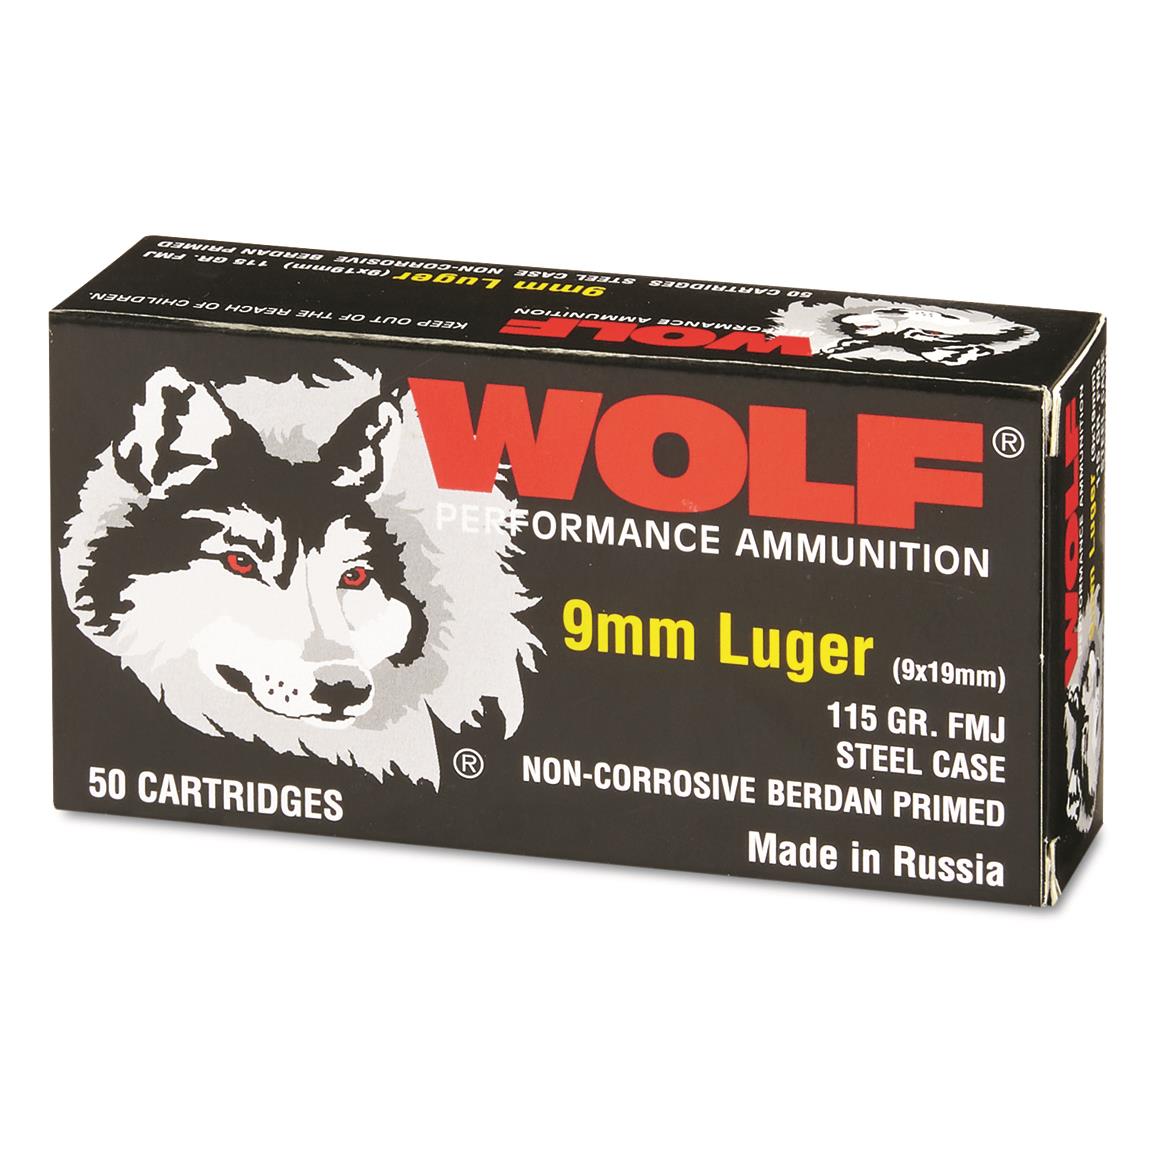 Wolf, 9mm, FMJ, 115 Grain, 50 Rounds